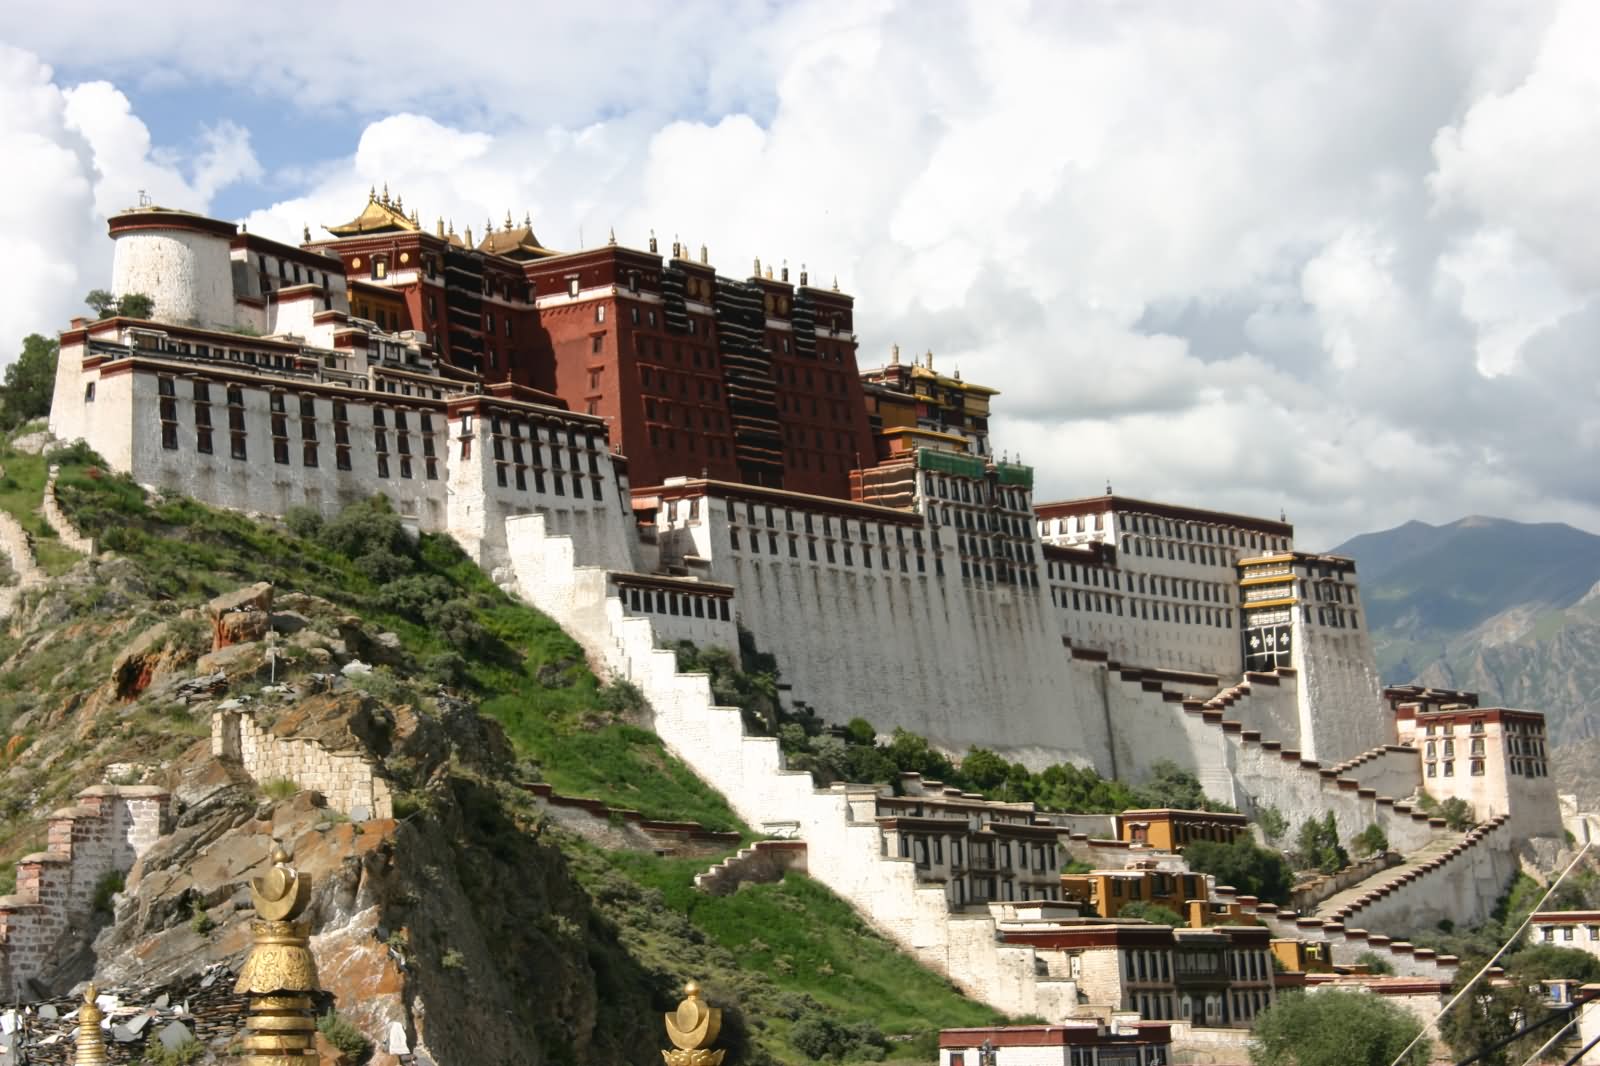 The Potala Palace On Red Hill In Lhasa, Tibet